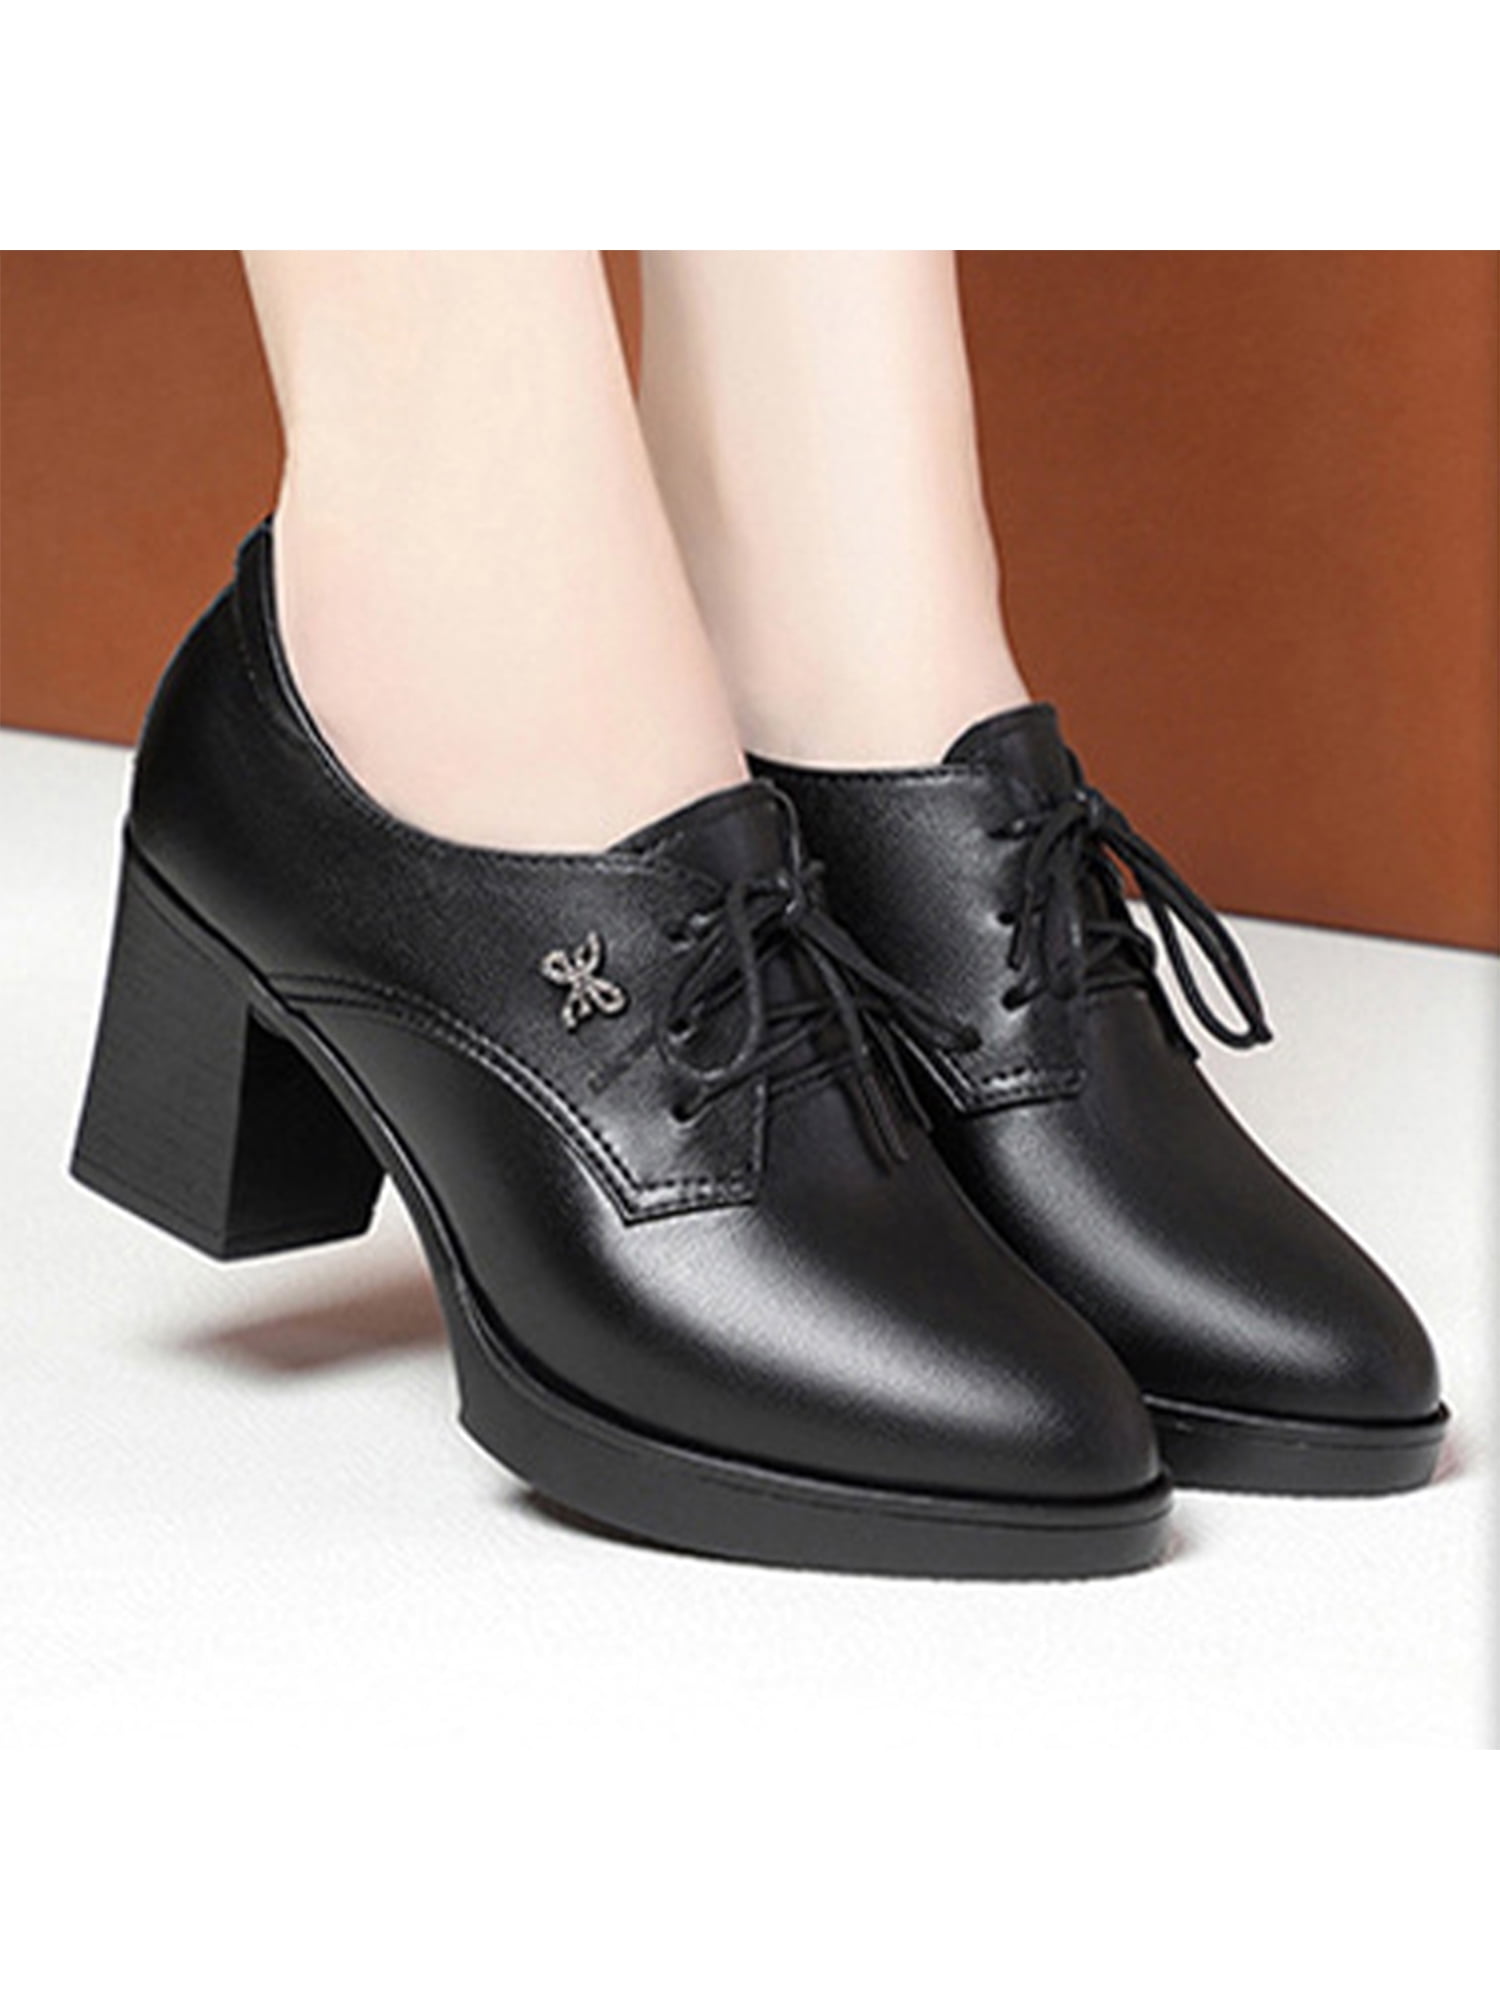 womens leather dress shoes